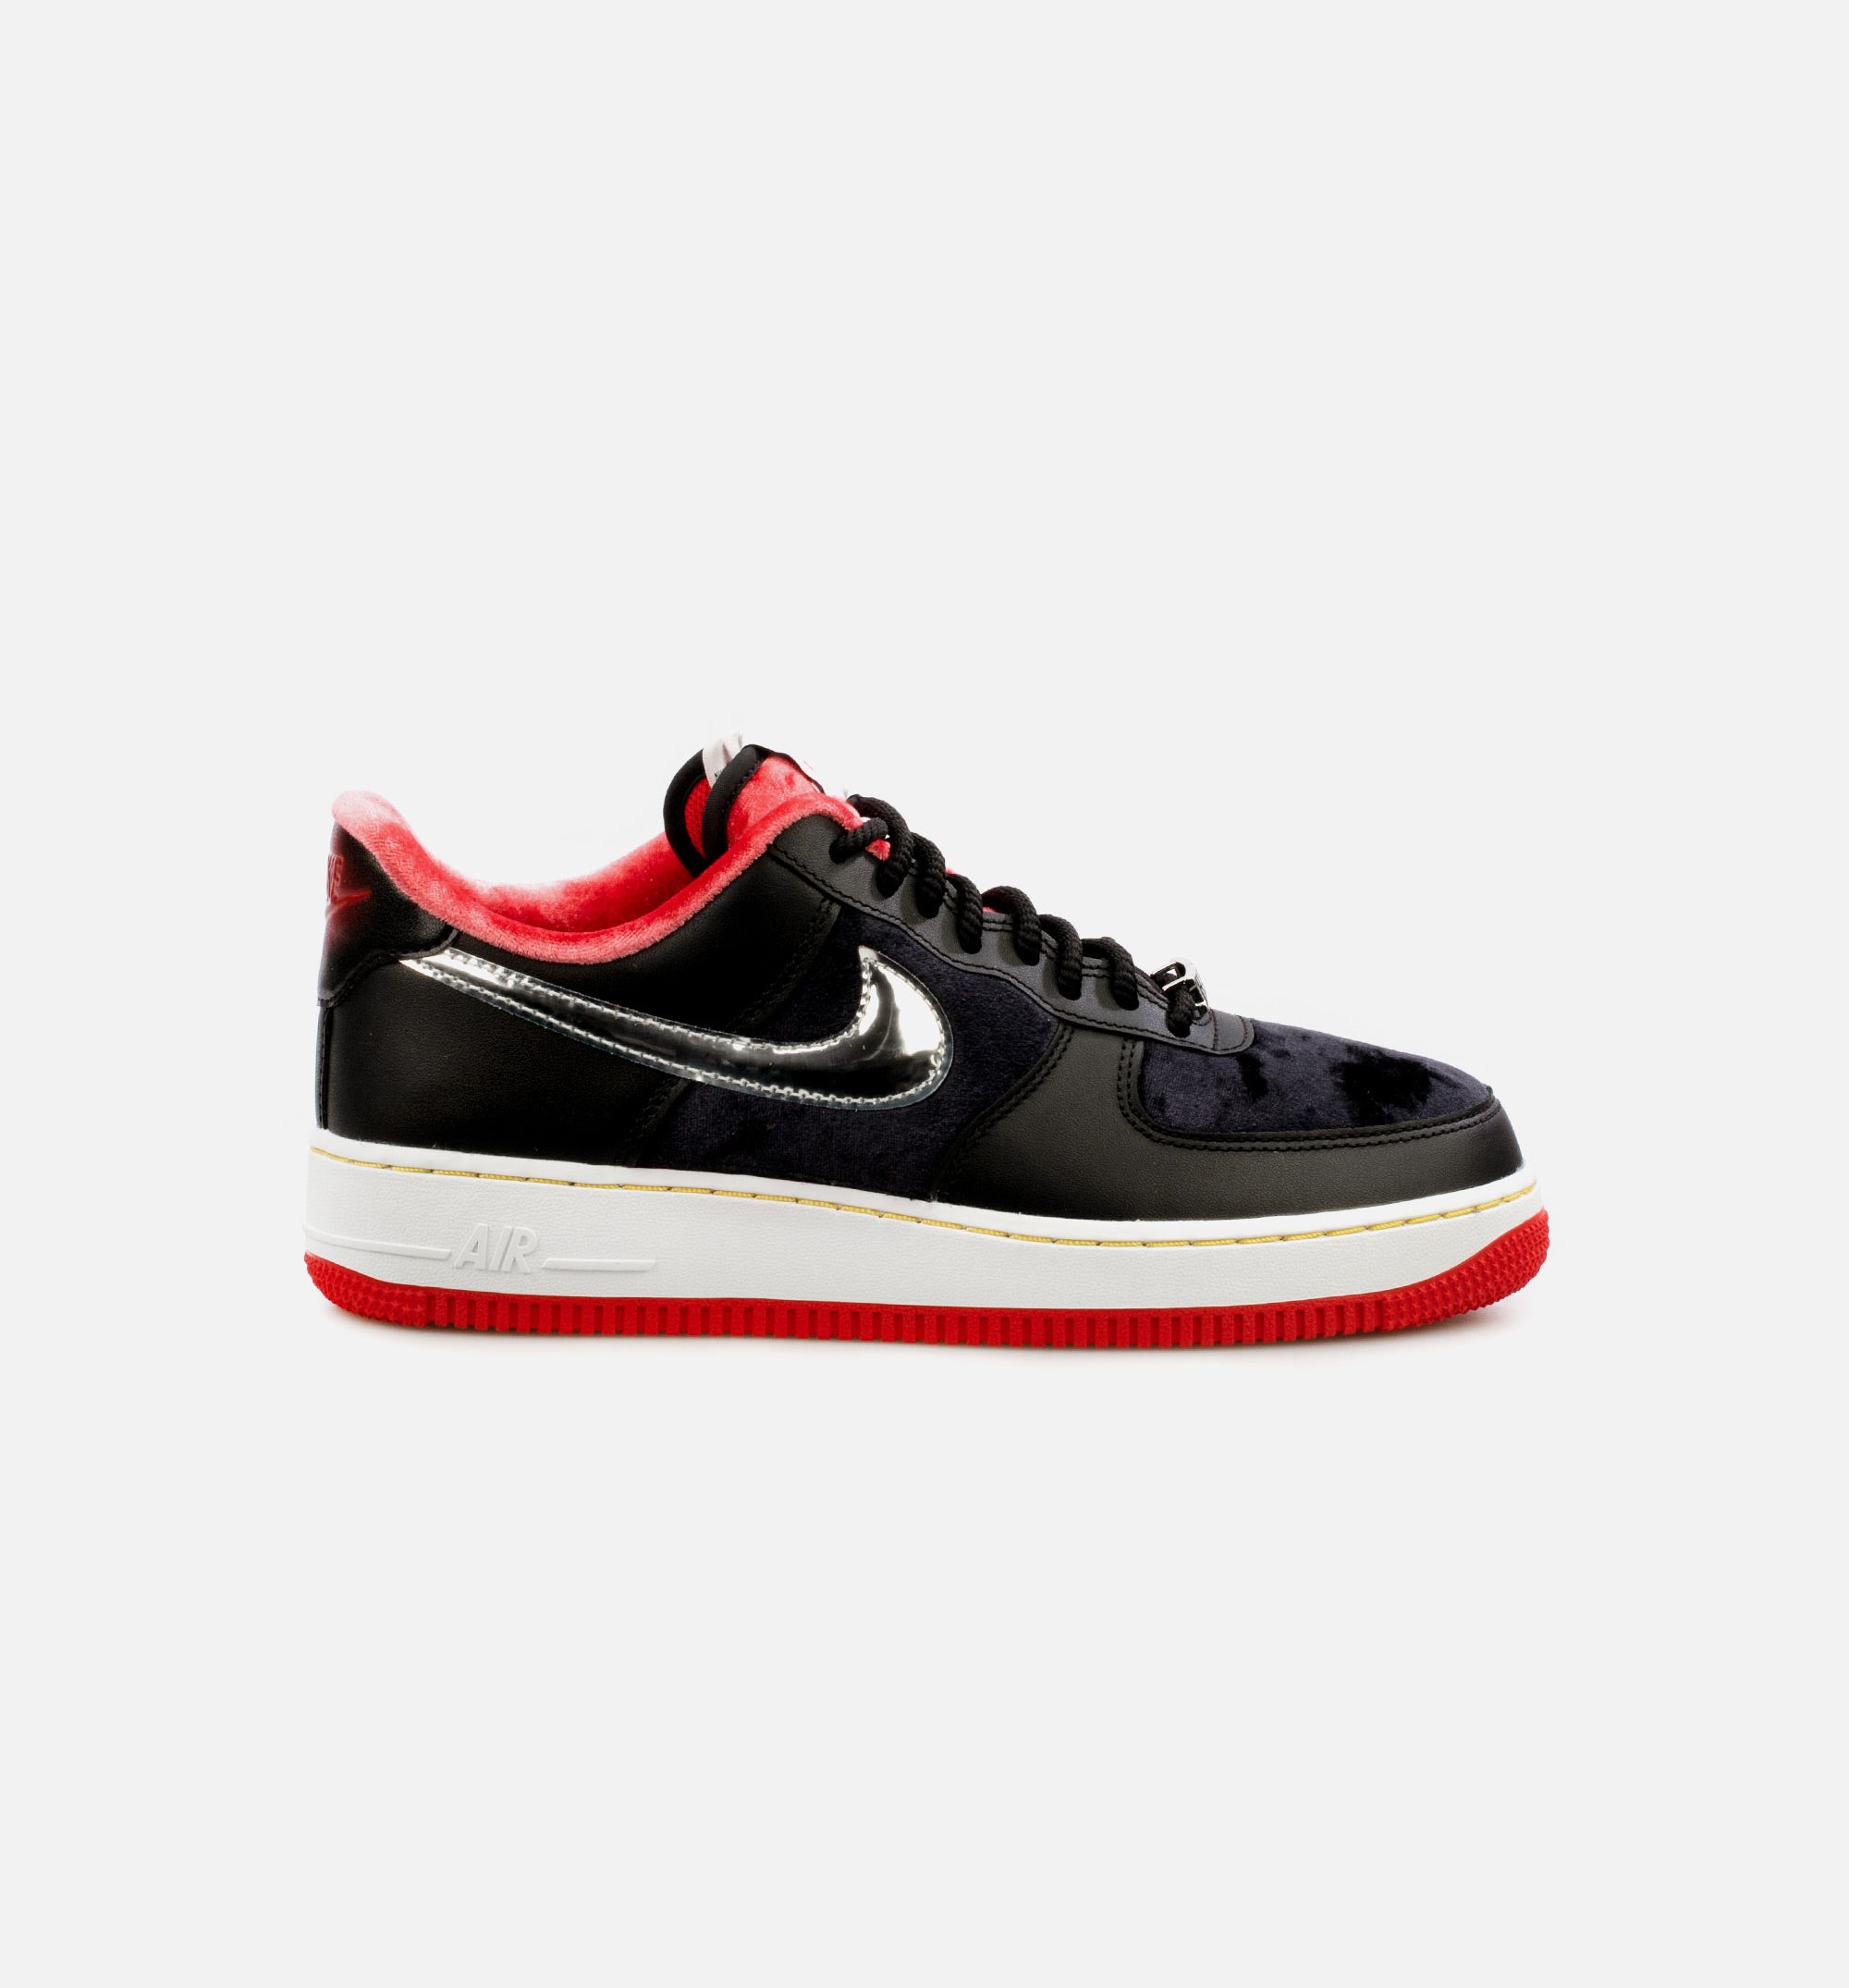  Nike Mens Air Force 1 Low '07 LV8 Next Nature Basketball Shoes  (7)